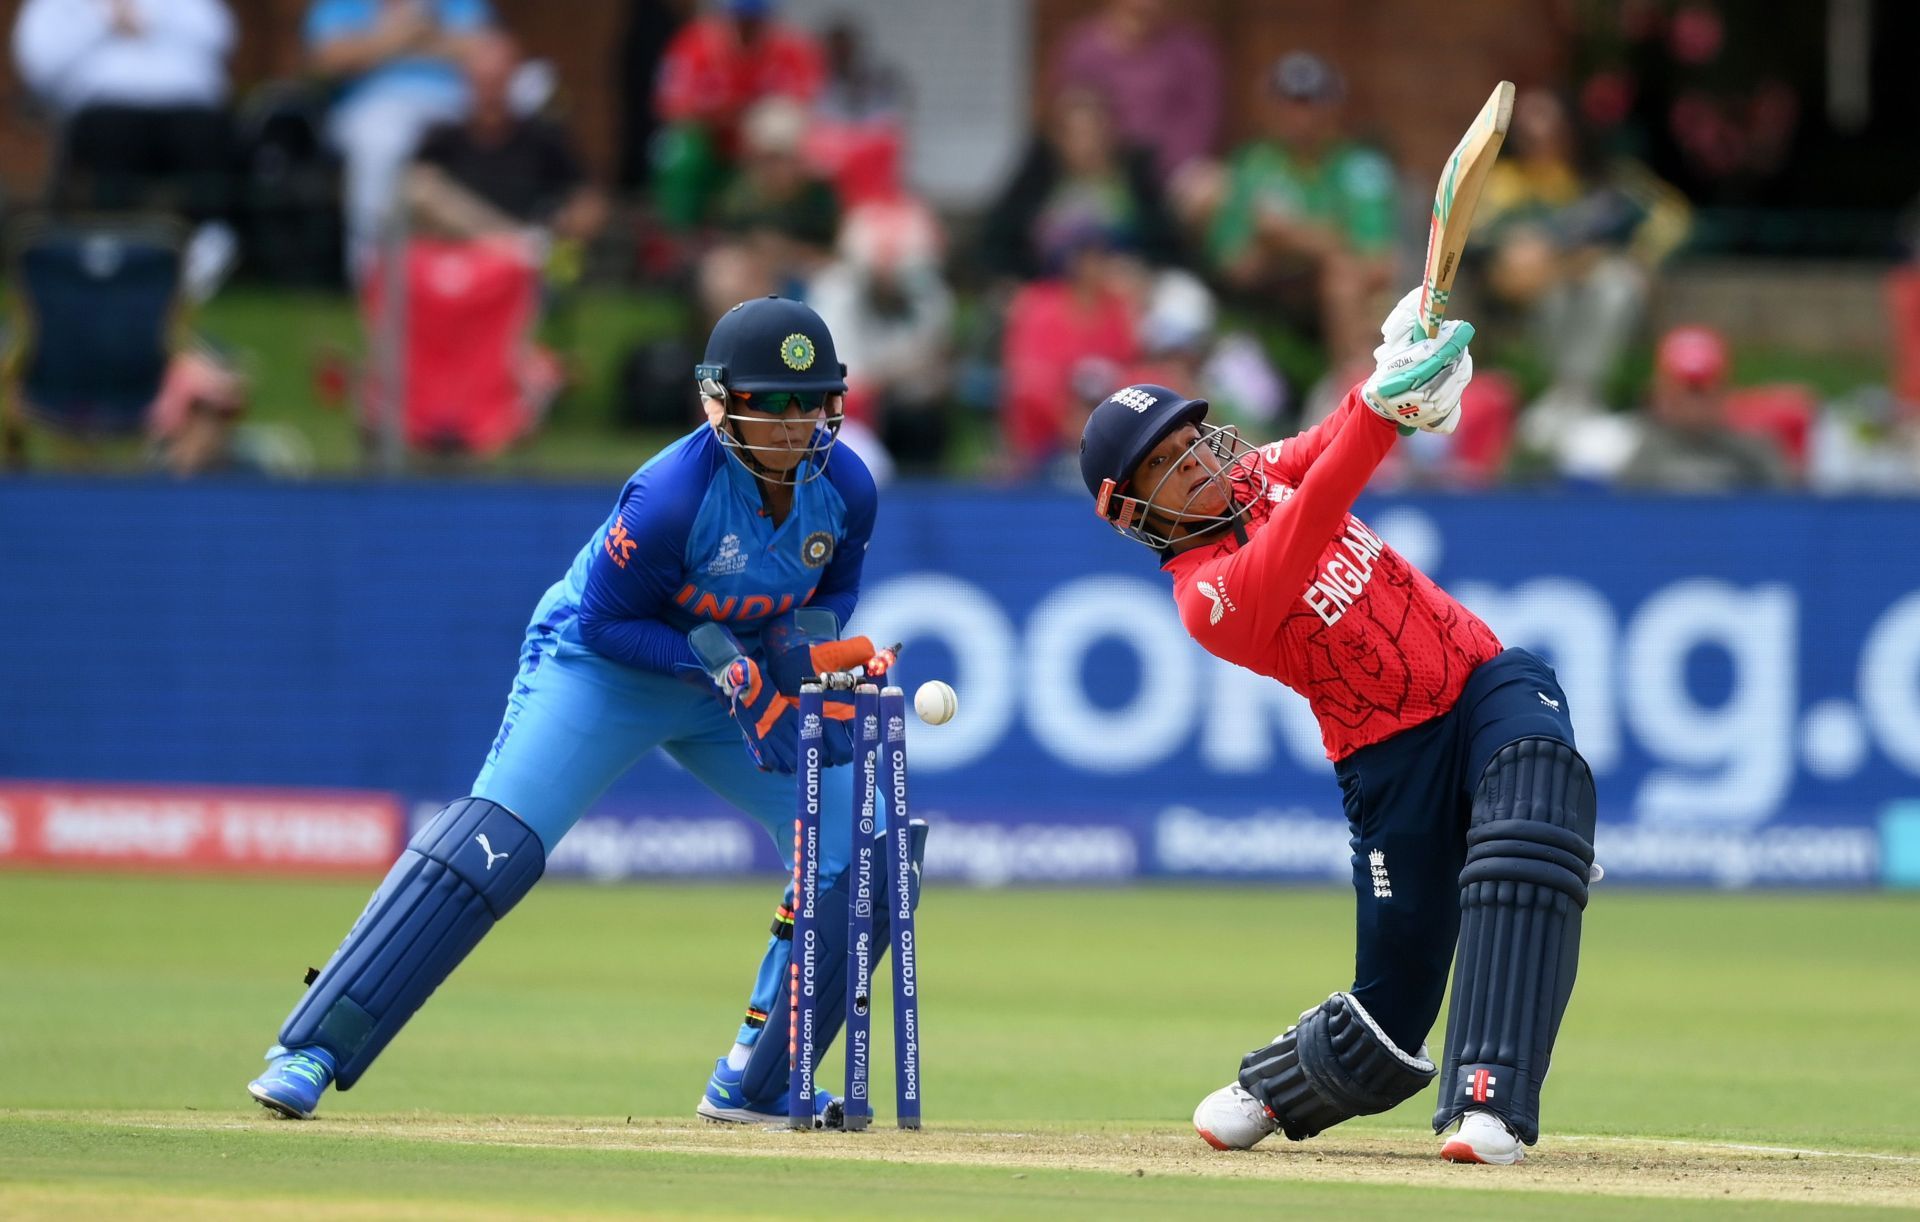 Sophia Dunkley was one of the batters to be bowled by Renuka Singh.